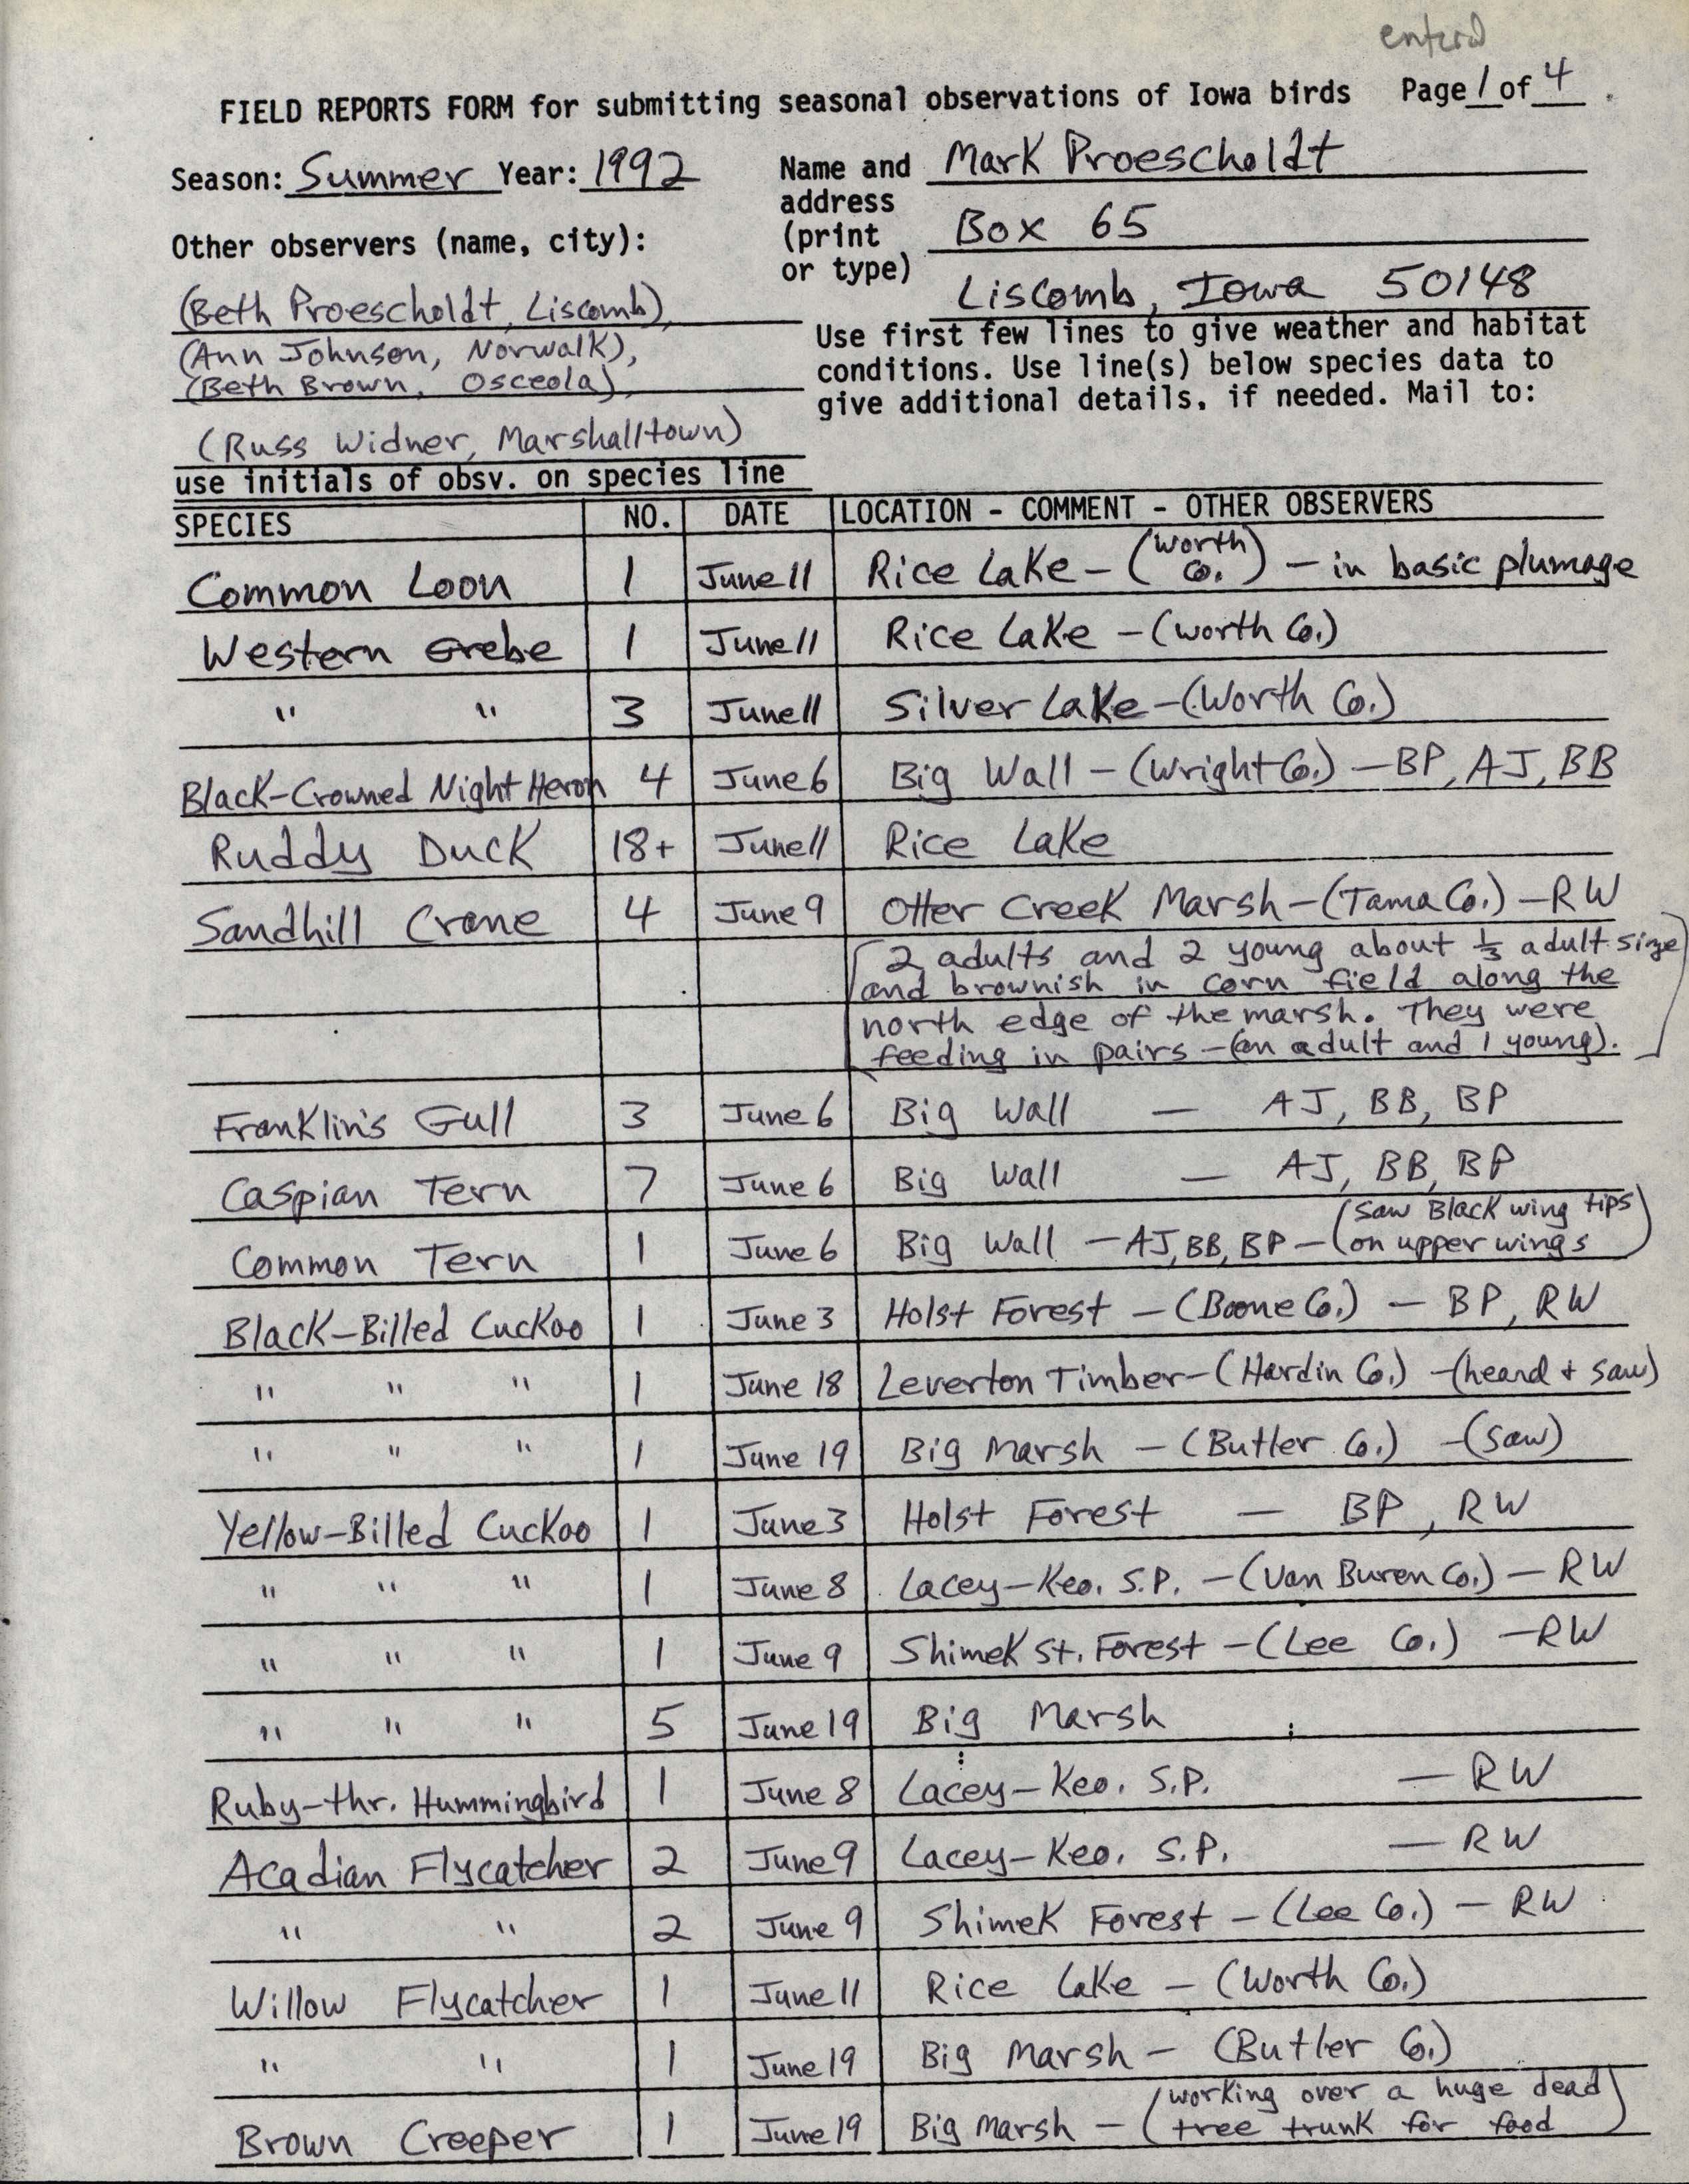 Field reports form for submitting seasonal observations of Iowa birds, Mark Proescholdt, summer 1992